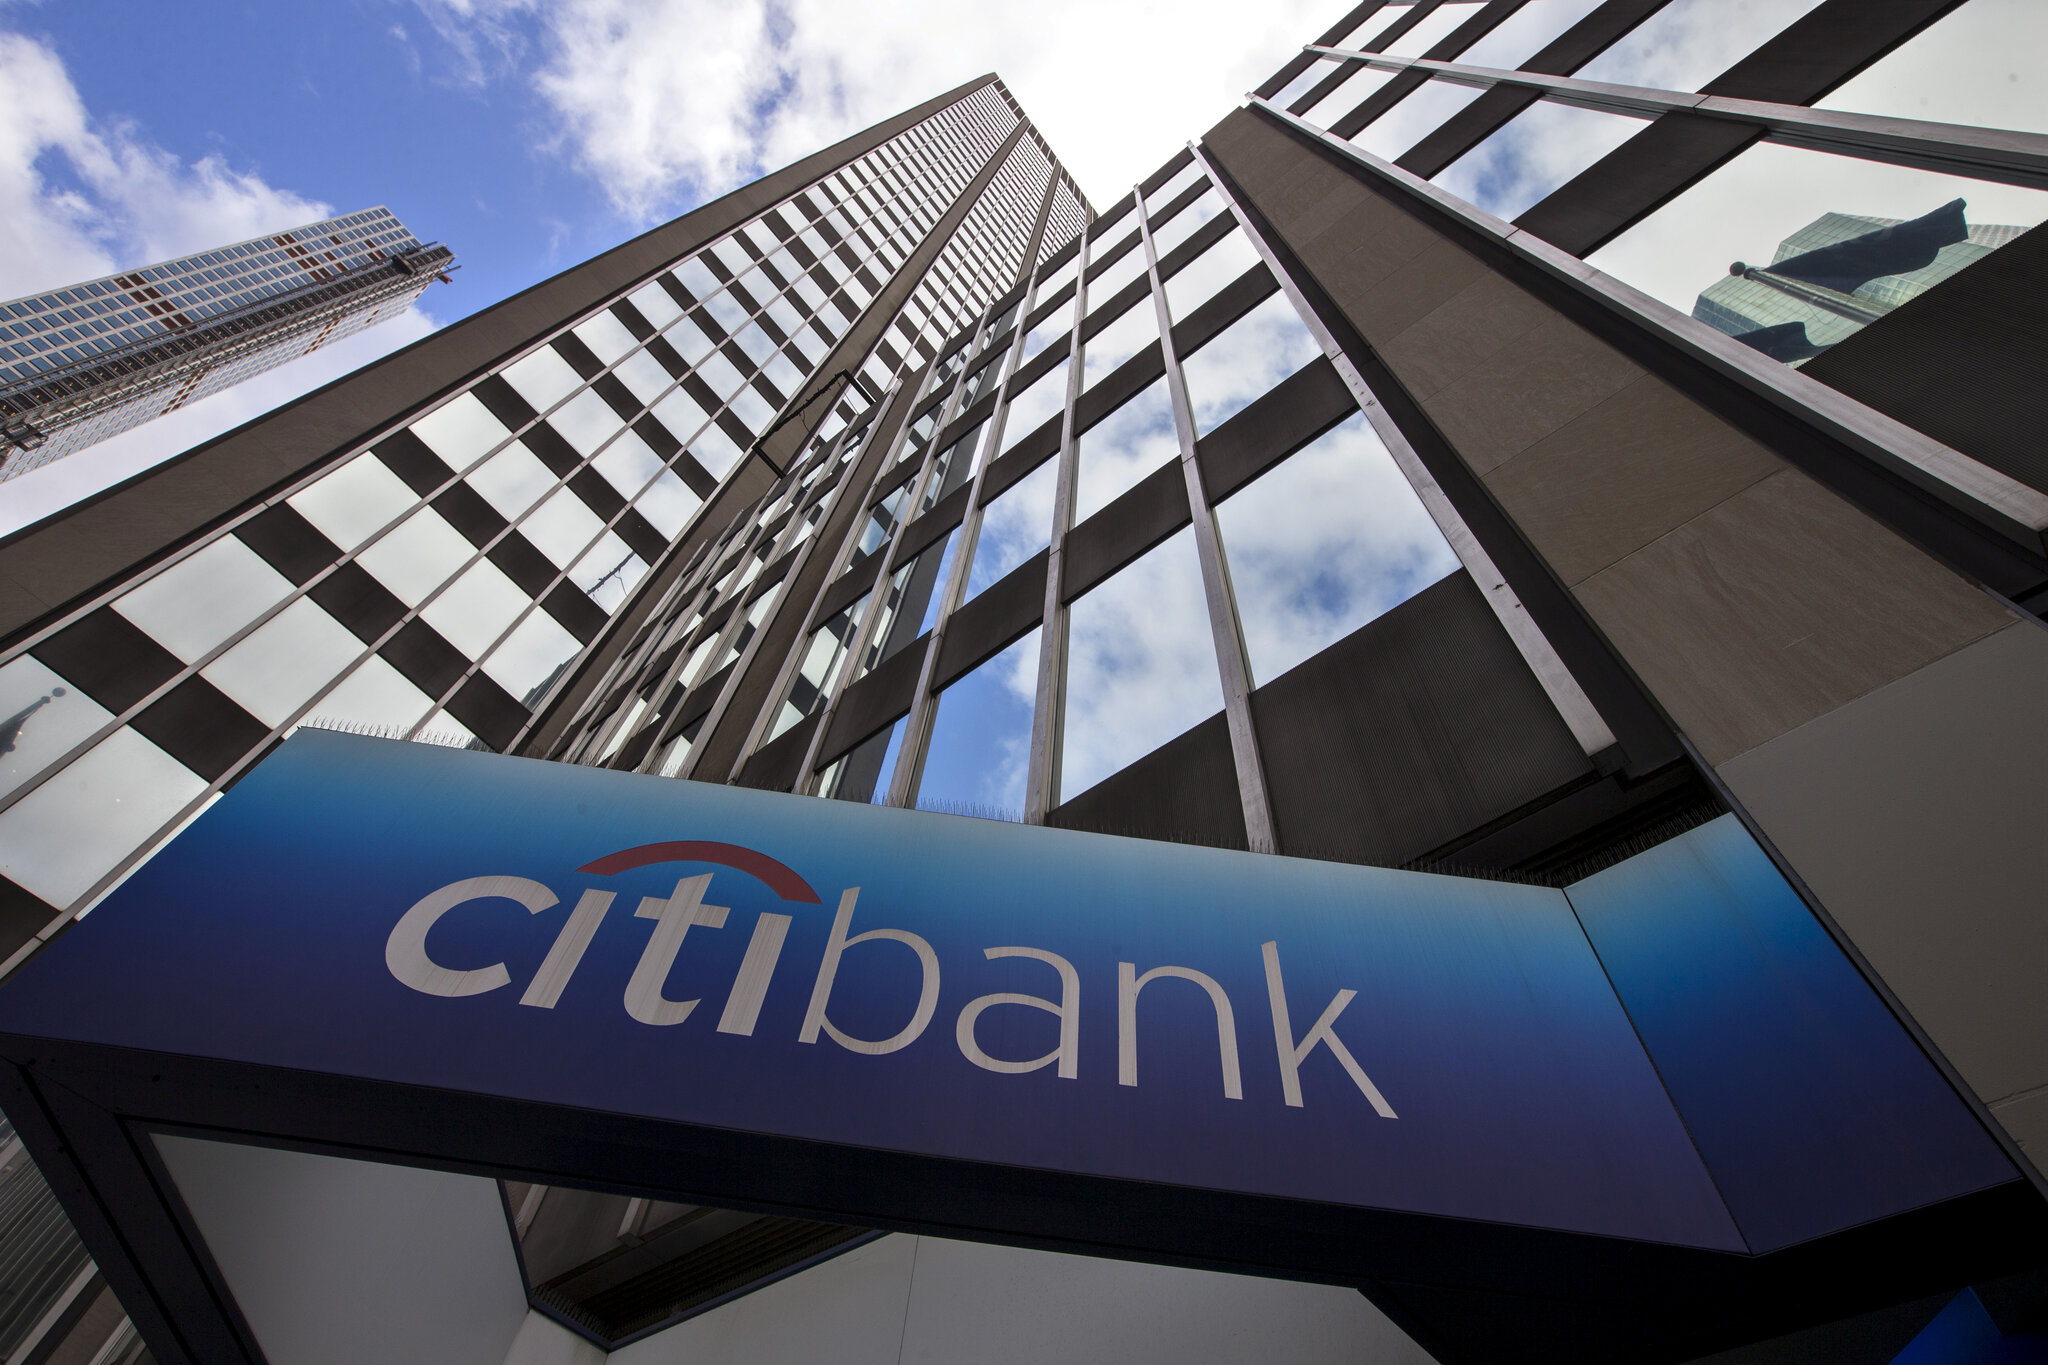 New York AG Battles Citibank: A David vs Goliath Story of Fighting for Data Safety